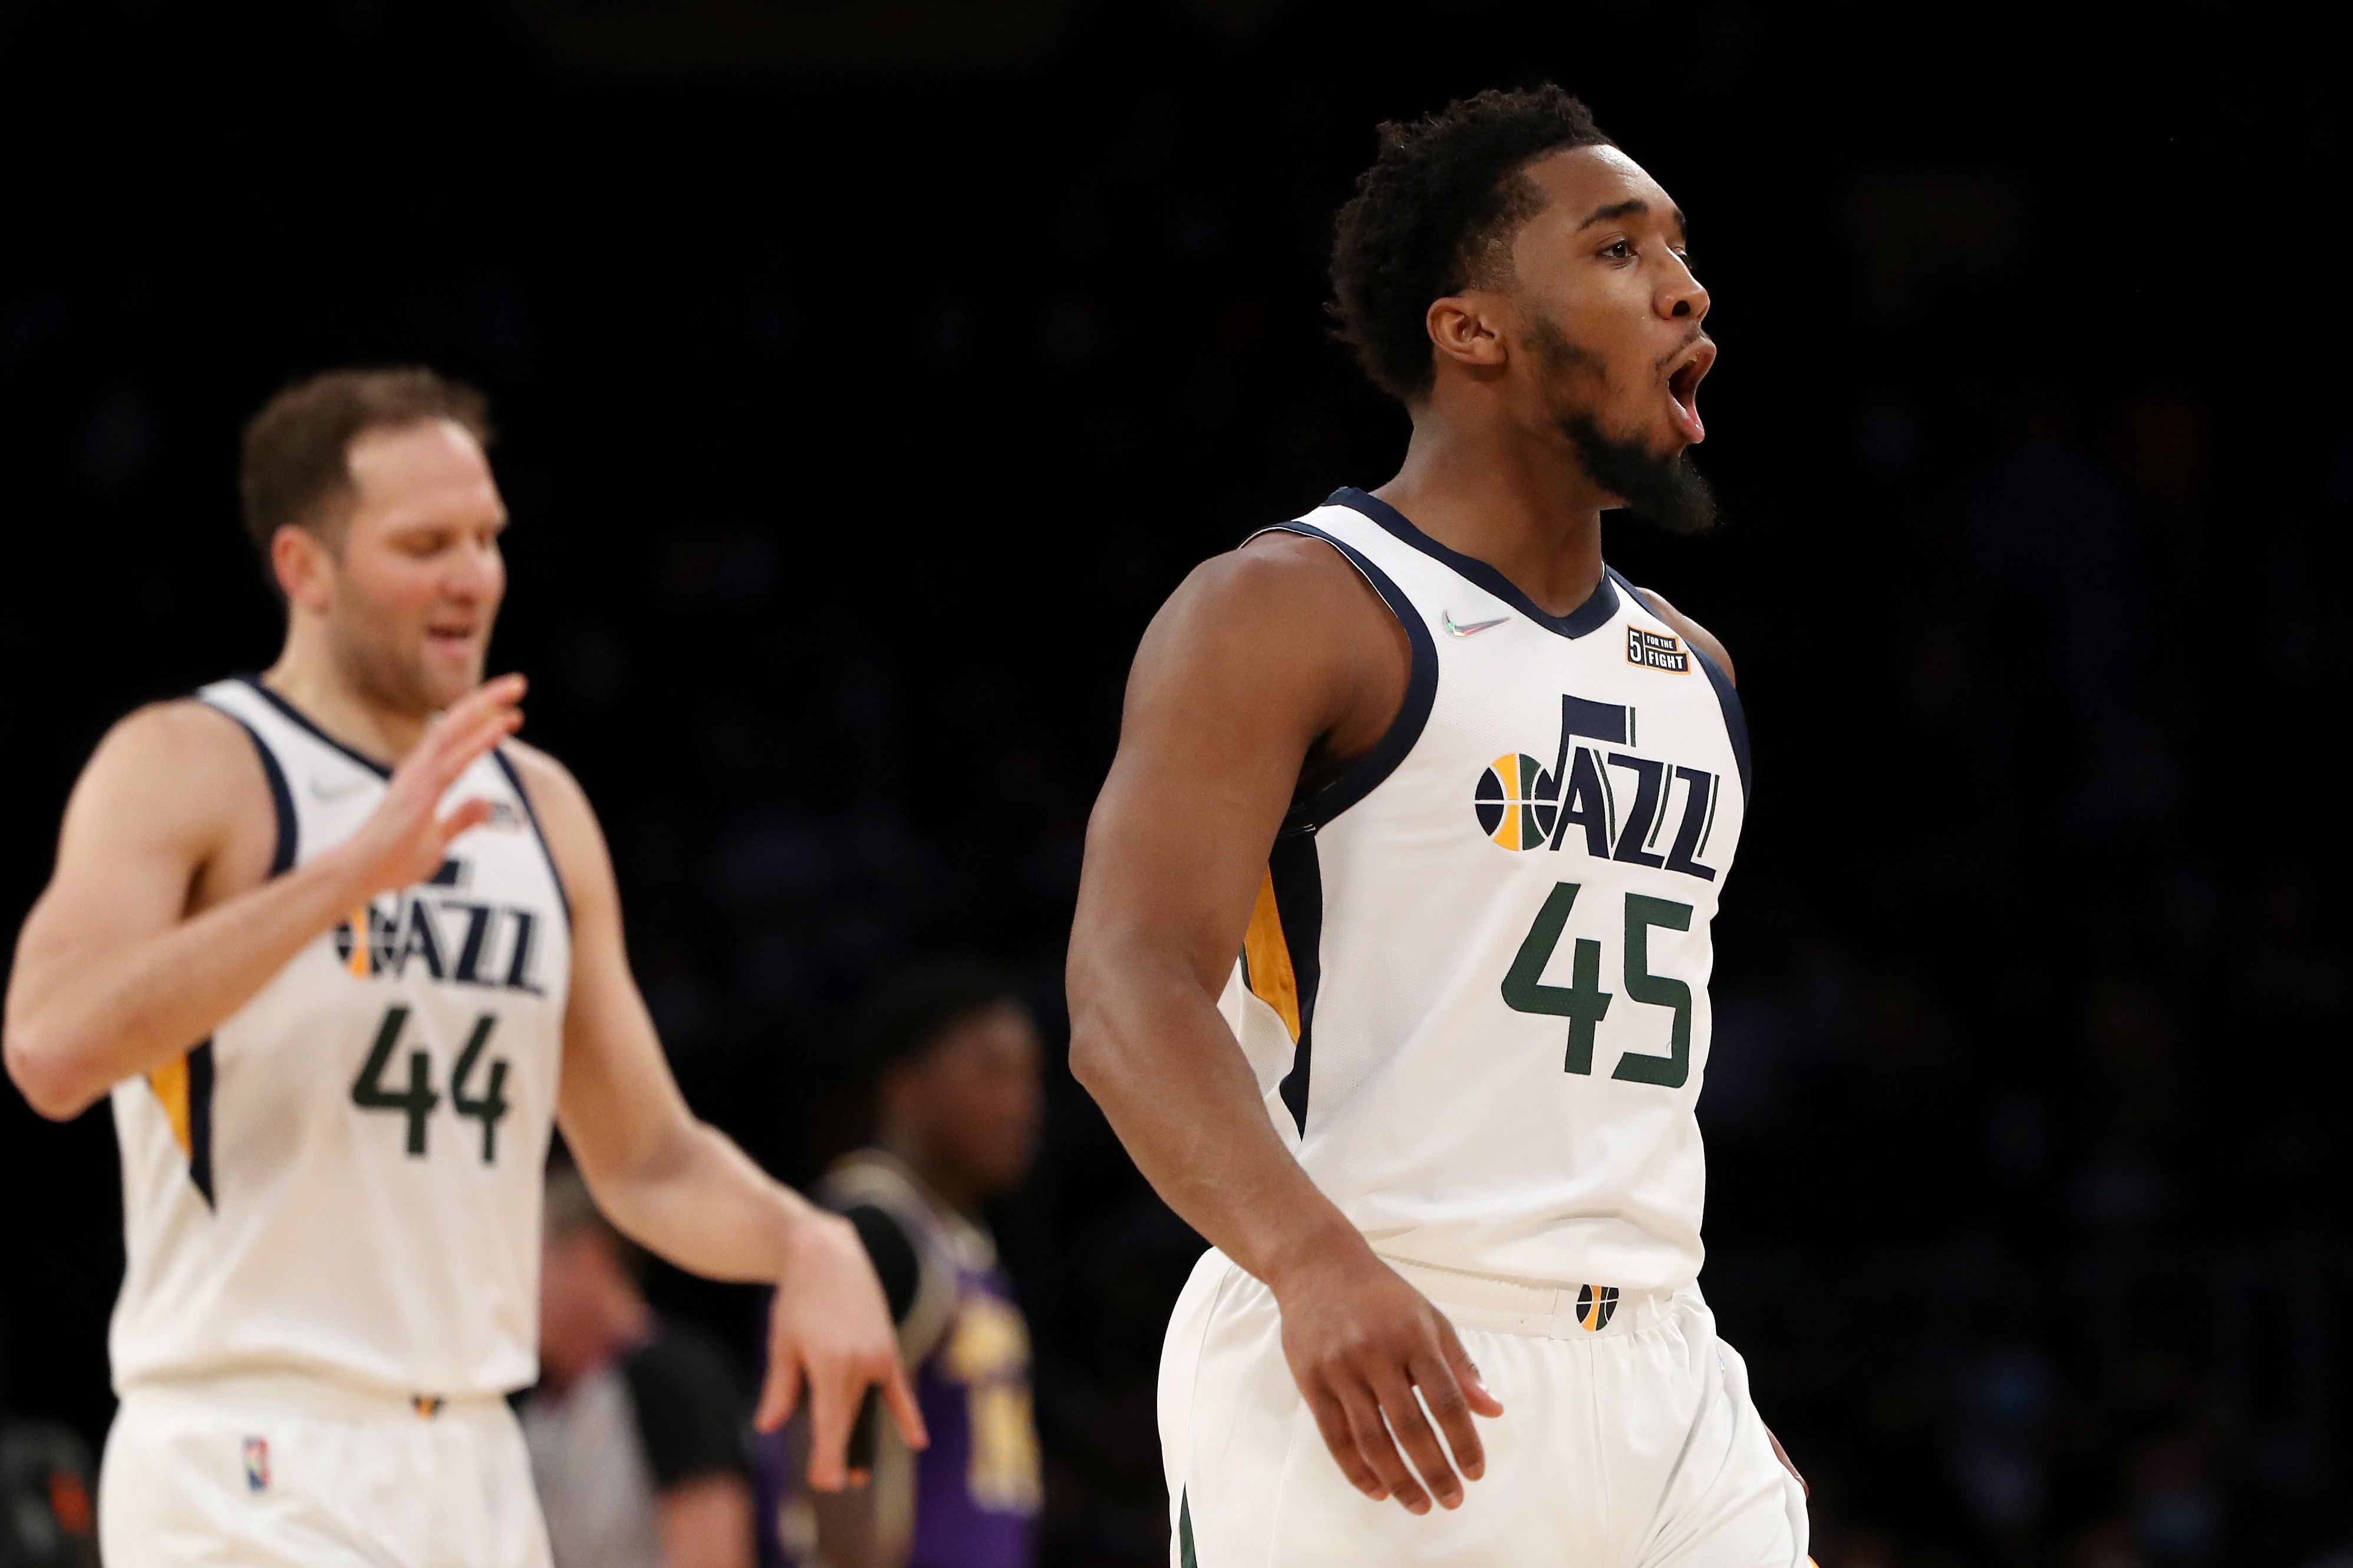 NBA Trade Rumor: Donovan Mitchell to Knicks, Russell Westbrook to Jazz in  3-Team Deal - Blazer's Edge